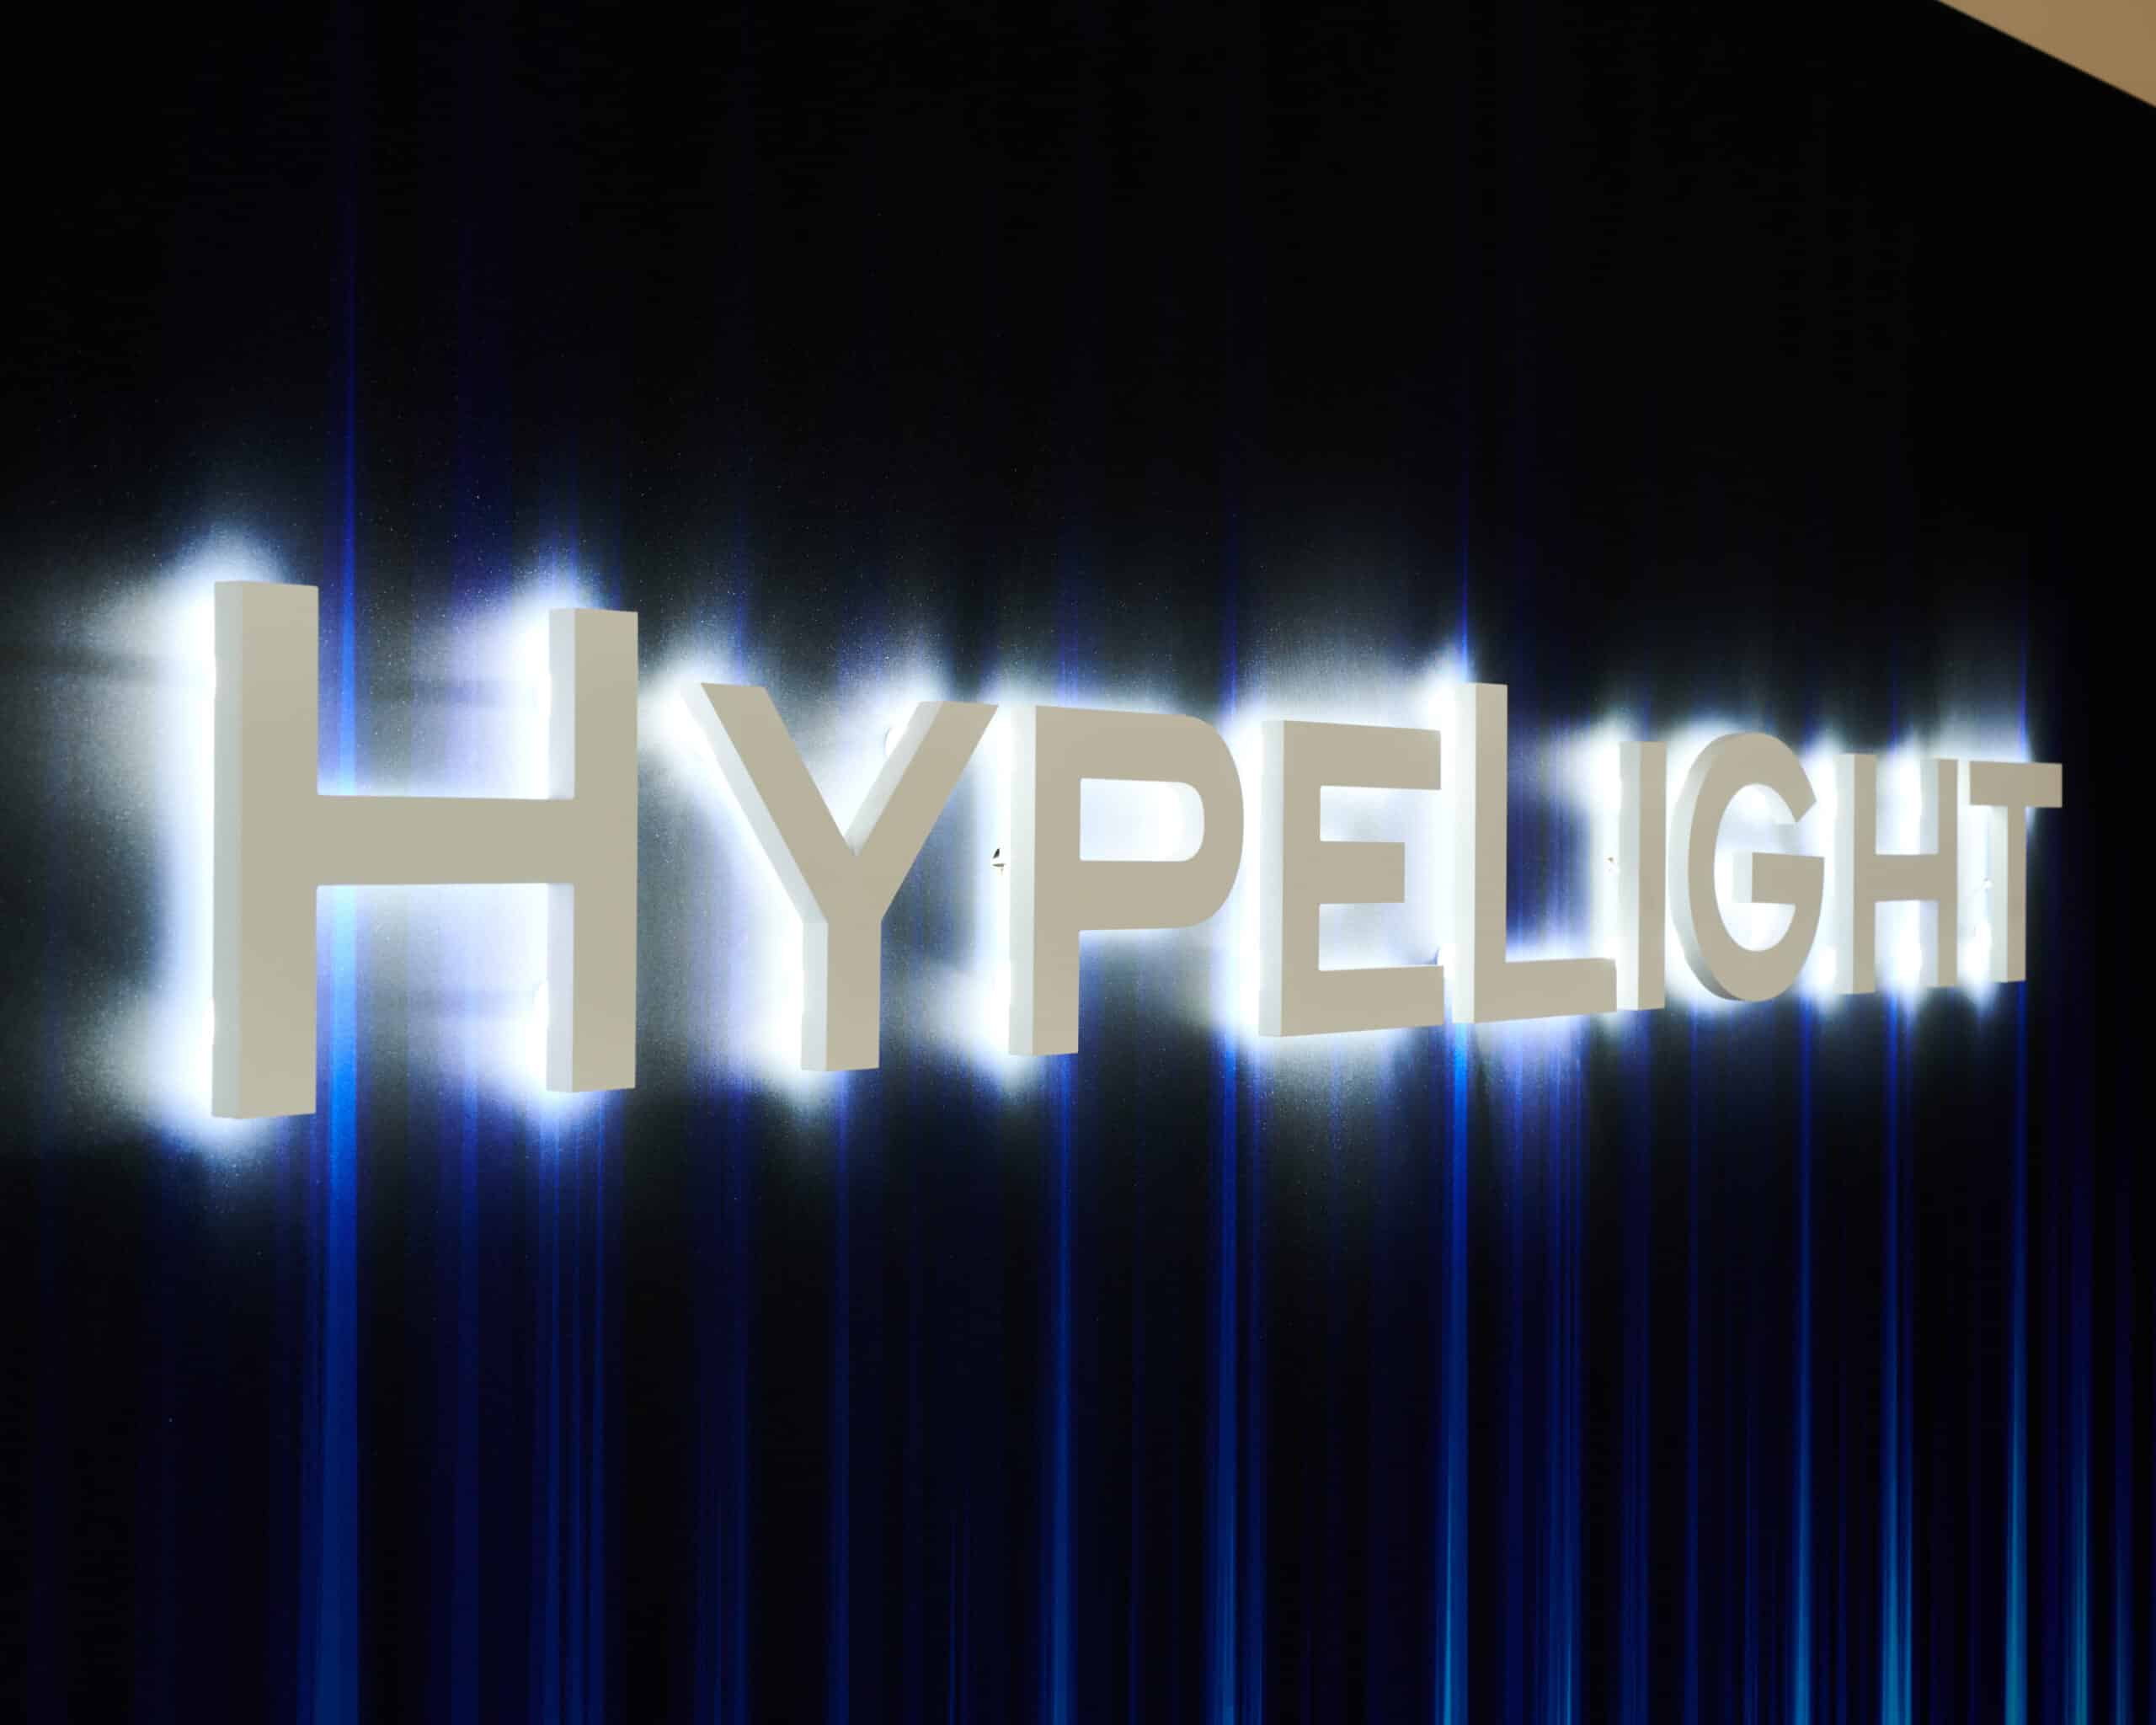 hype light illuminated dimensional letters